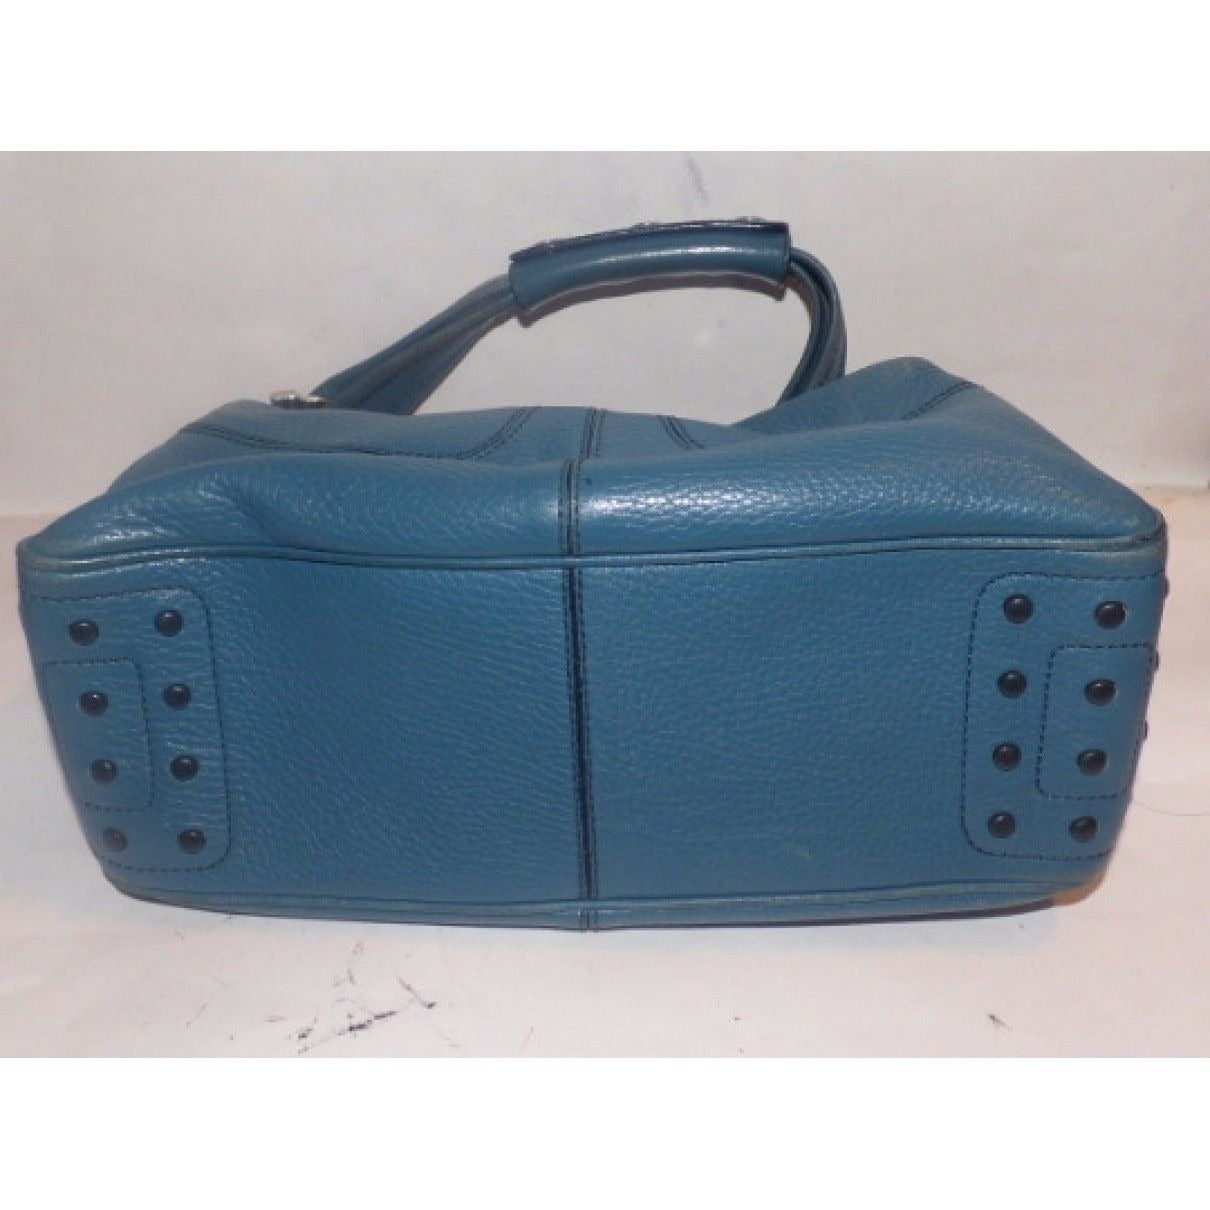 Tod's, robin's egg blue, grained leather, retro, top handle satchel